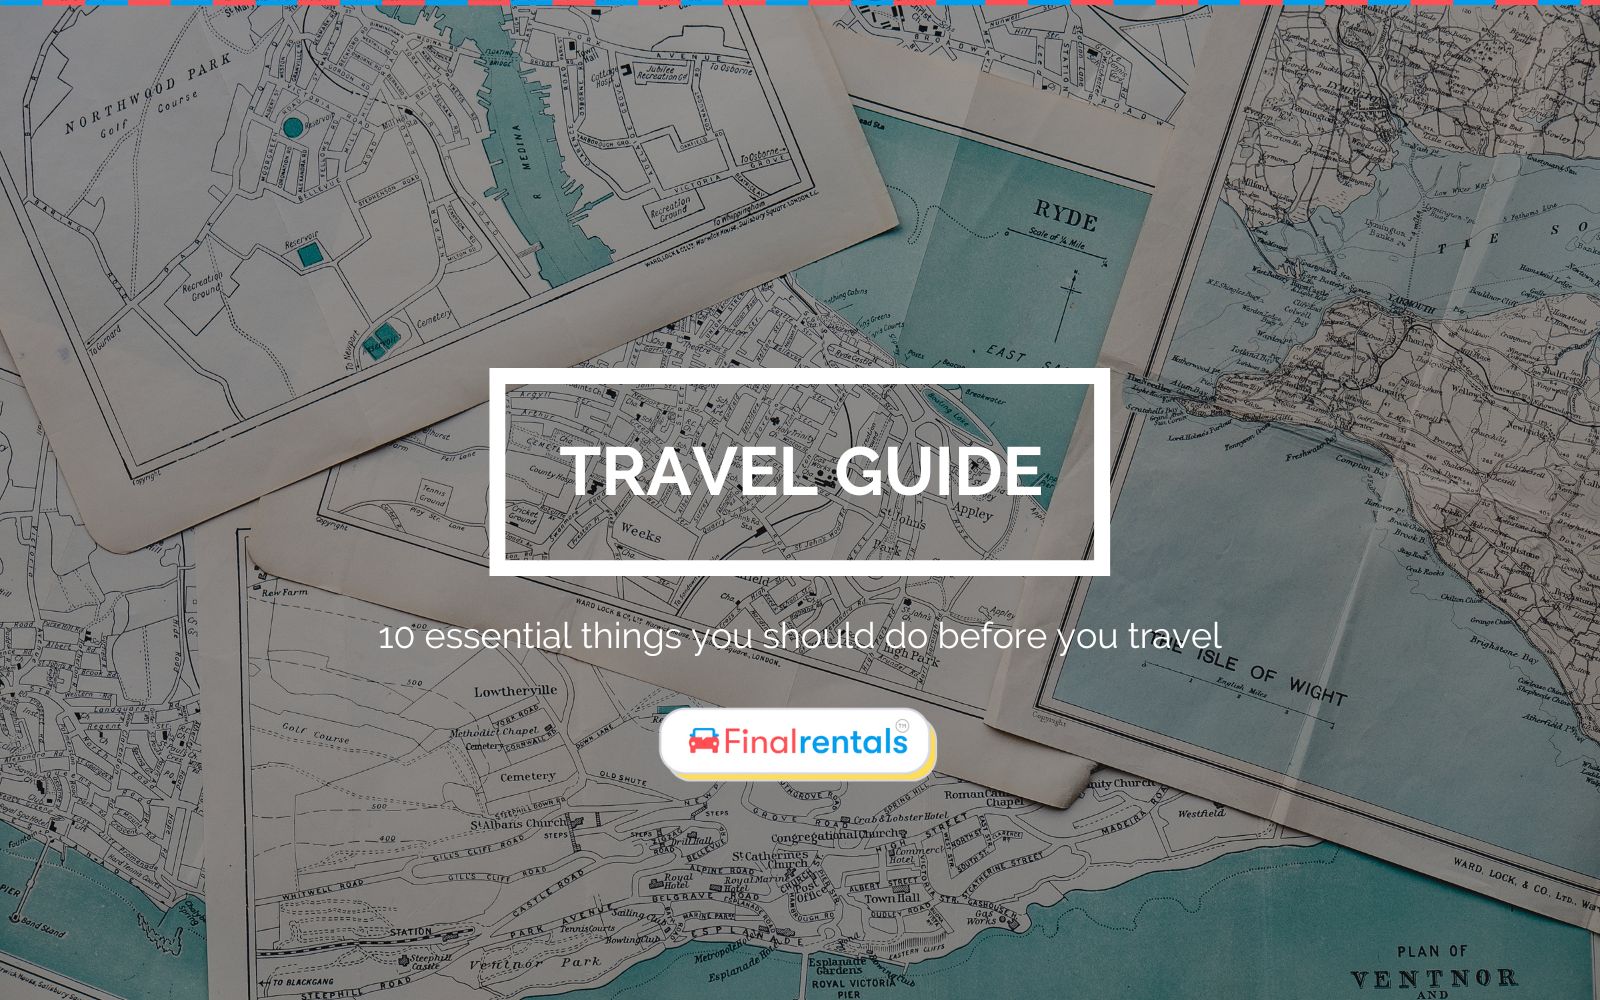 10 essential things you should do before you travel